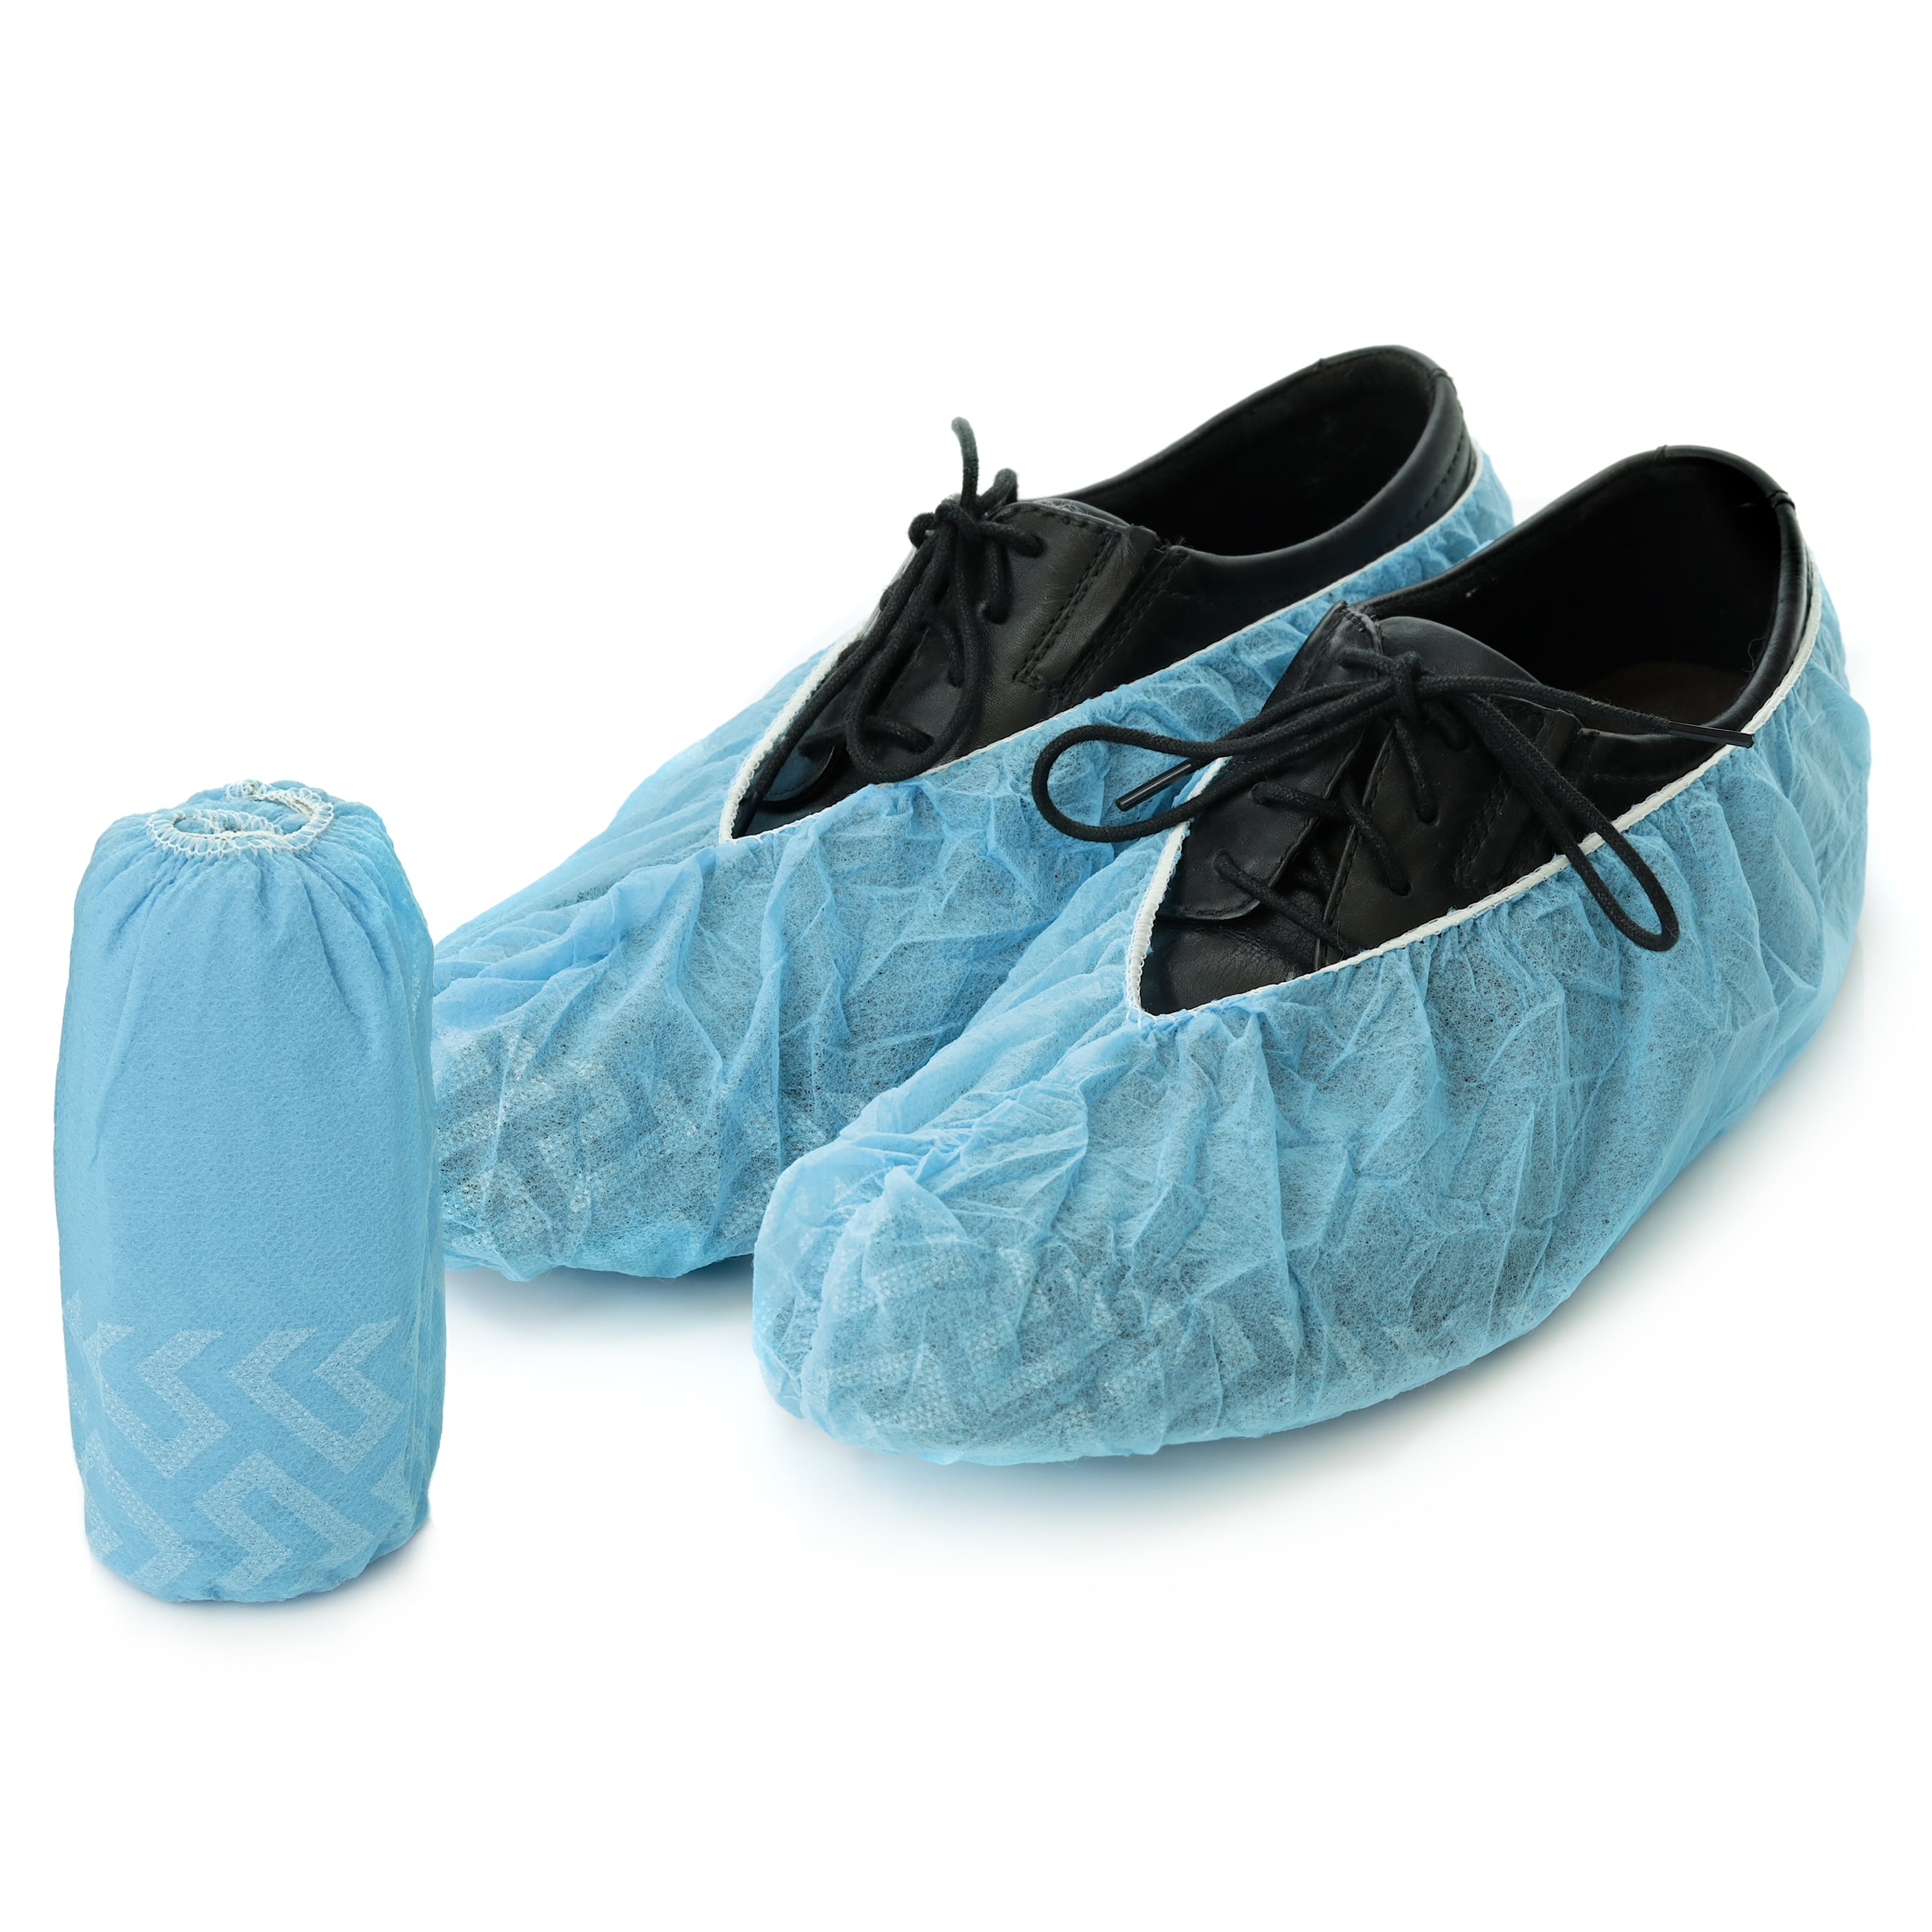 100 Covers Shoe Covers Non Slip Package of 50 Pair Blue 